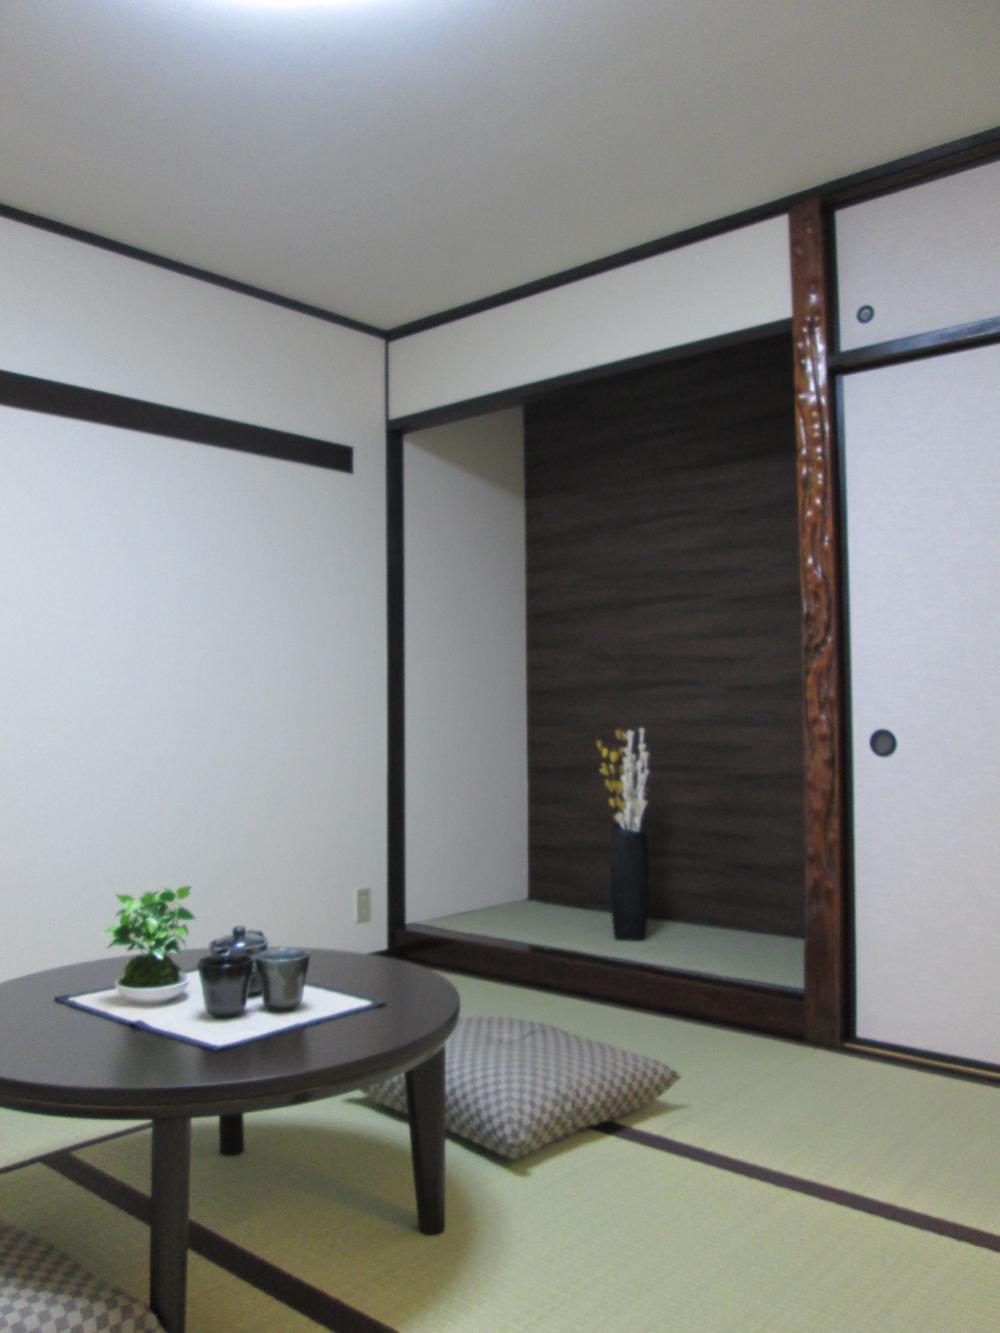 Non-living room. Alcove of a Japanese-style room.